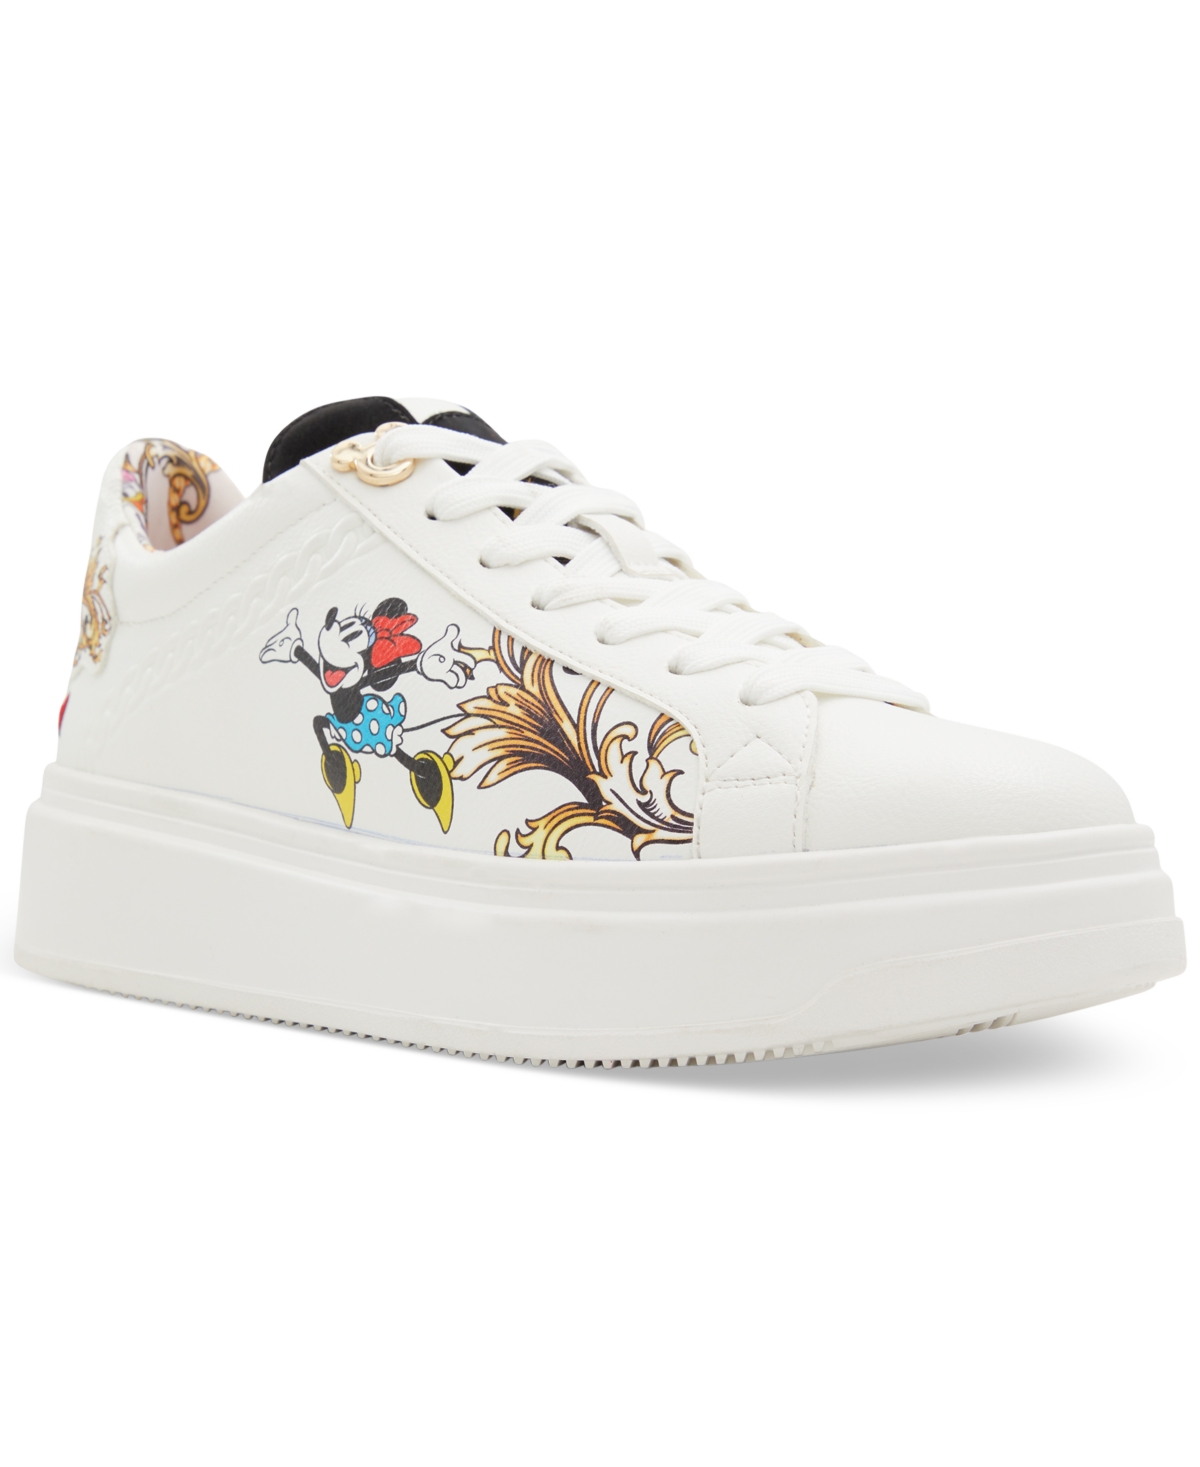 x Disney Women's D100 Graphic Lace-Up Low-Top Sneakers - White Mickey